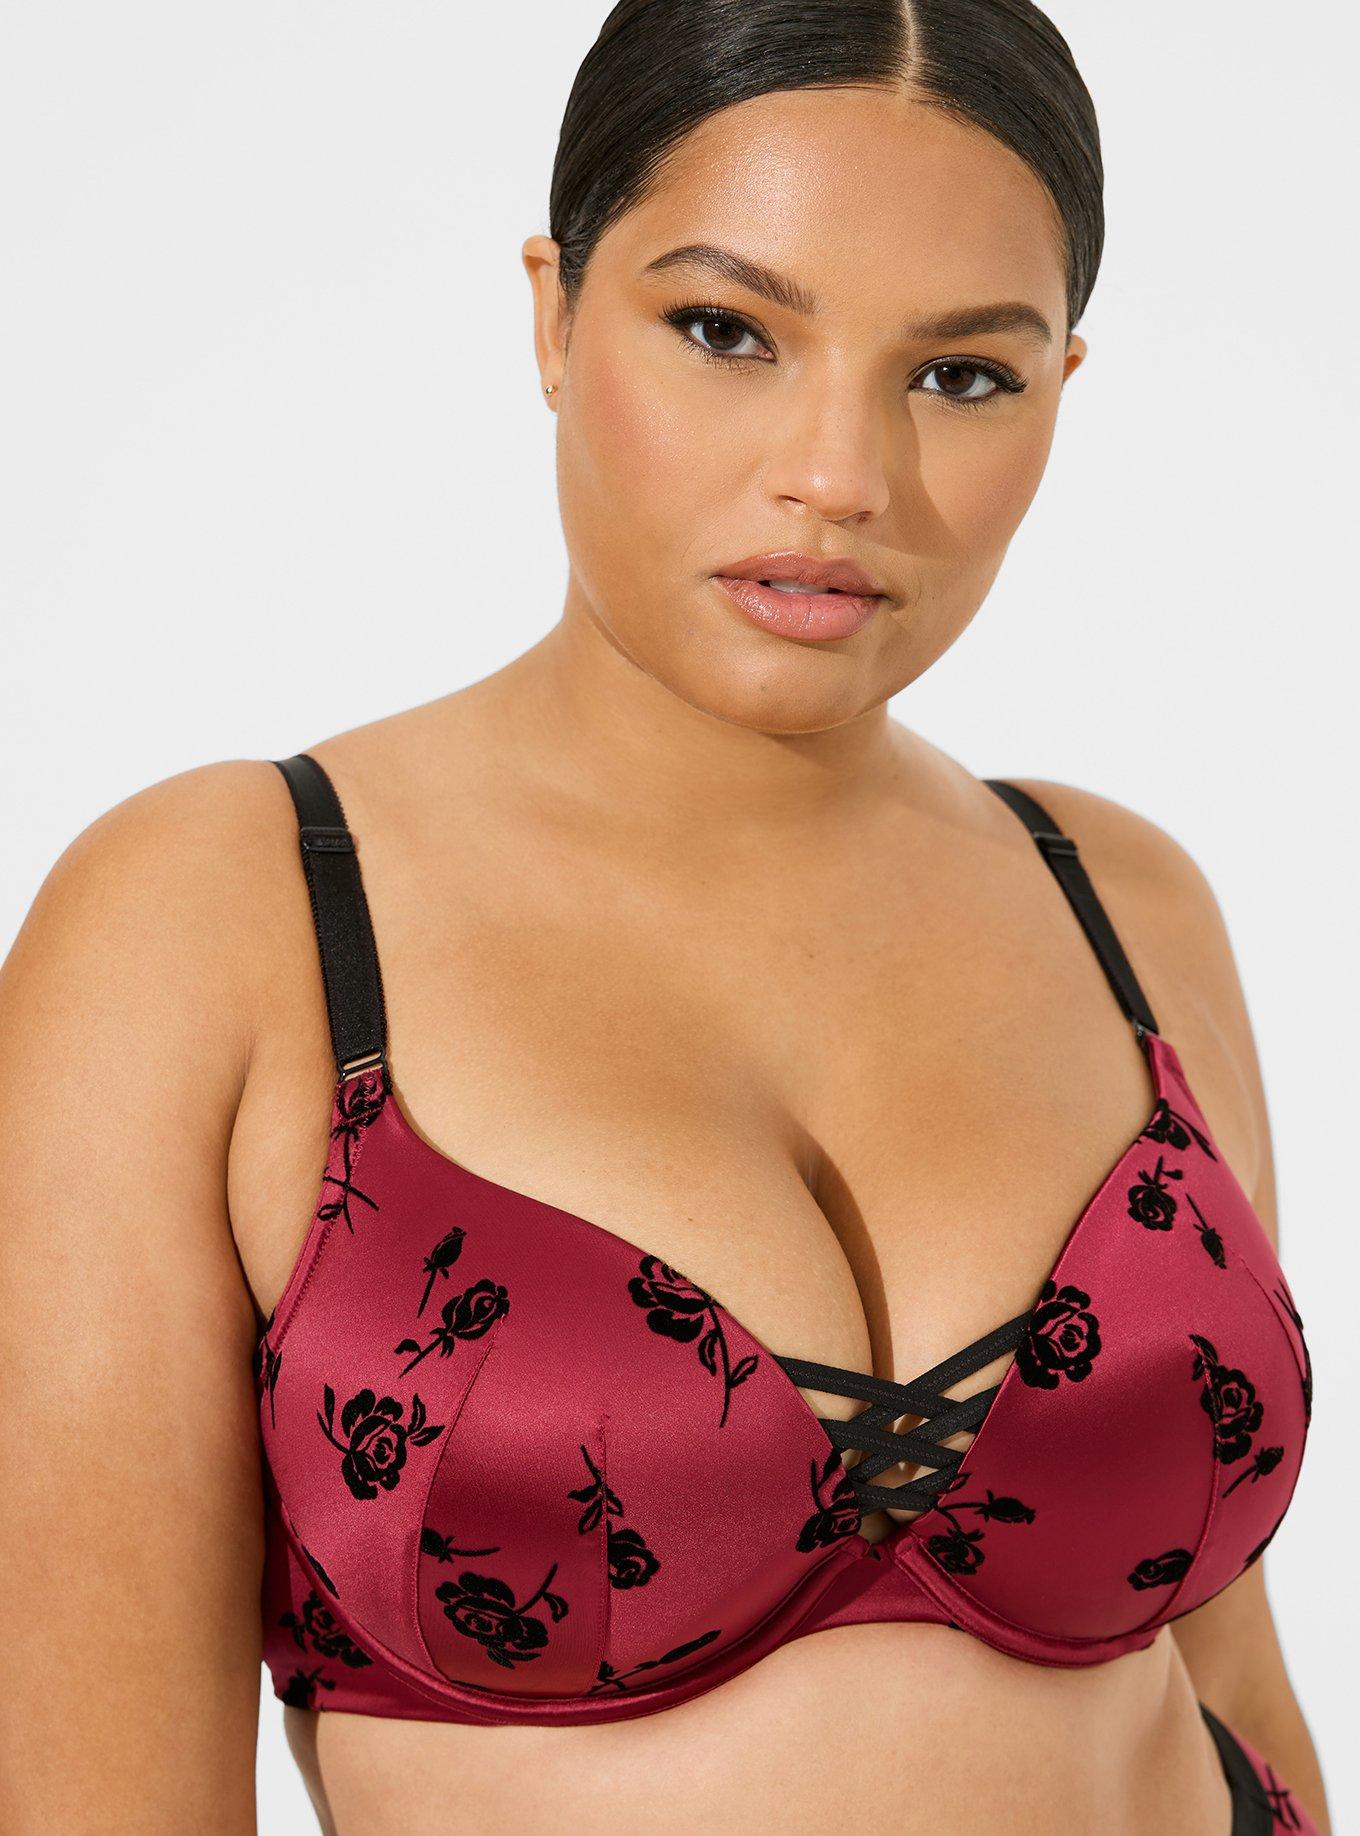 Lace Underwire Push-Up Bra for Plus Size Women